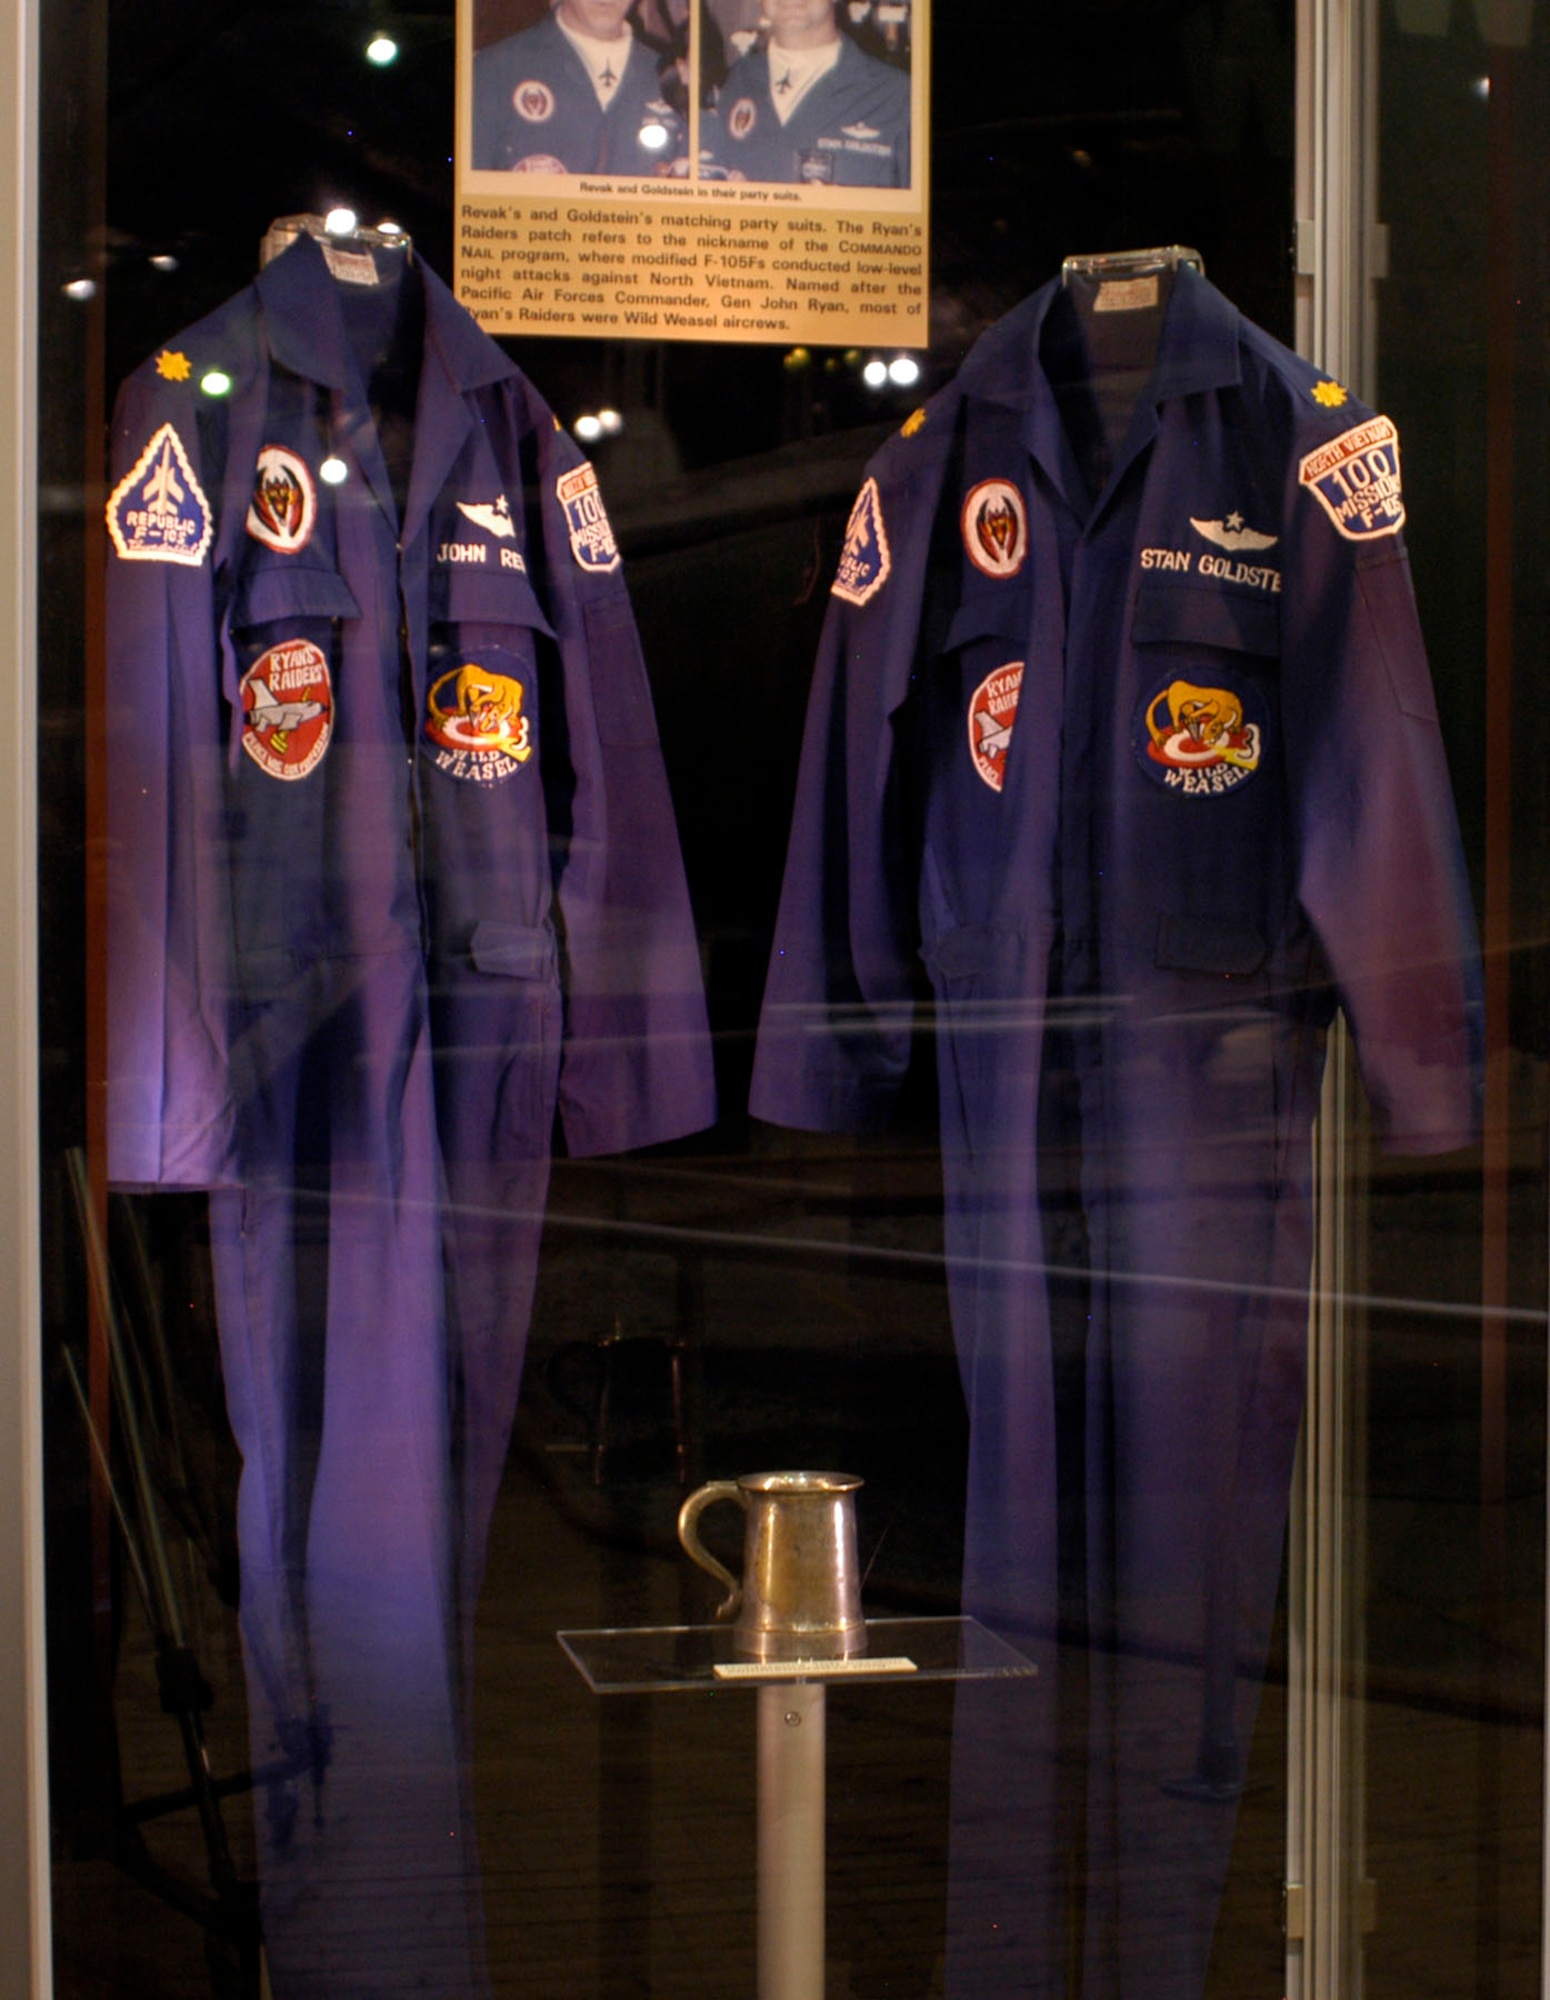 DAYTON, Ohio - Revak's and Goldstein's matching party suits. The "Ryan's Raiders" patch refers to the nickname of the Commando Nail program, where modified F-105Fs conducted low-level night attacks against North Vietnam. Named after the Pacific Air Forces commander, Gen. John Ryan, most of the Ryan's Raiders were Wild Weasel aircrews. These suits are on display in the First In, Last Out: Wild Weasels vs. SAMs exhibit in the Southeast Asia War Gallery at the National Museum of the U.S. Air Force. (U.S. Air Force photo)